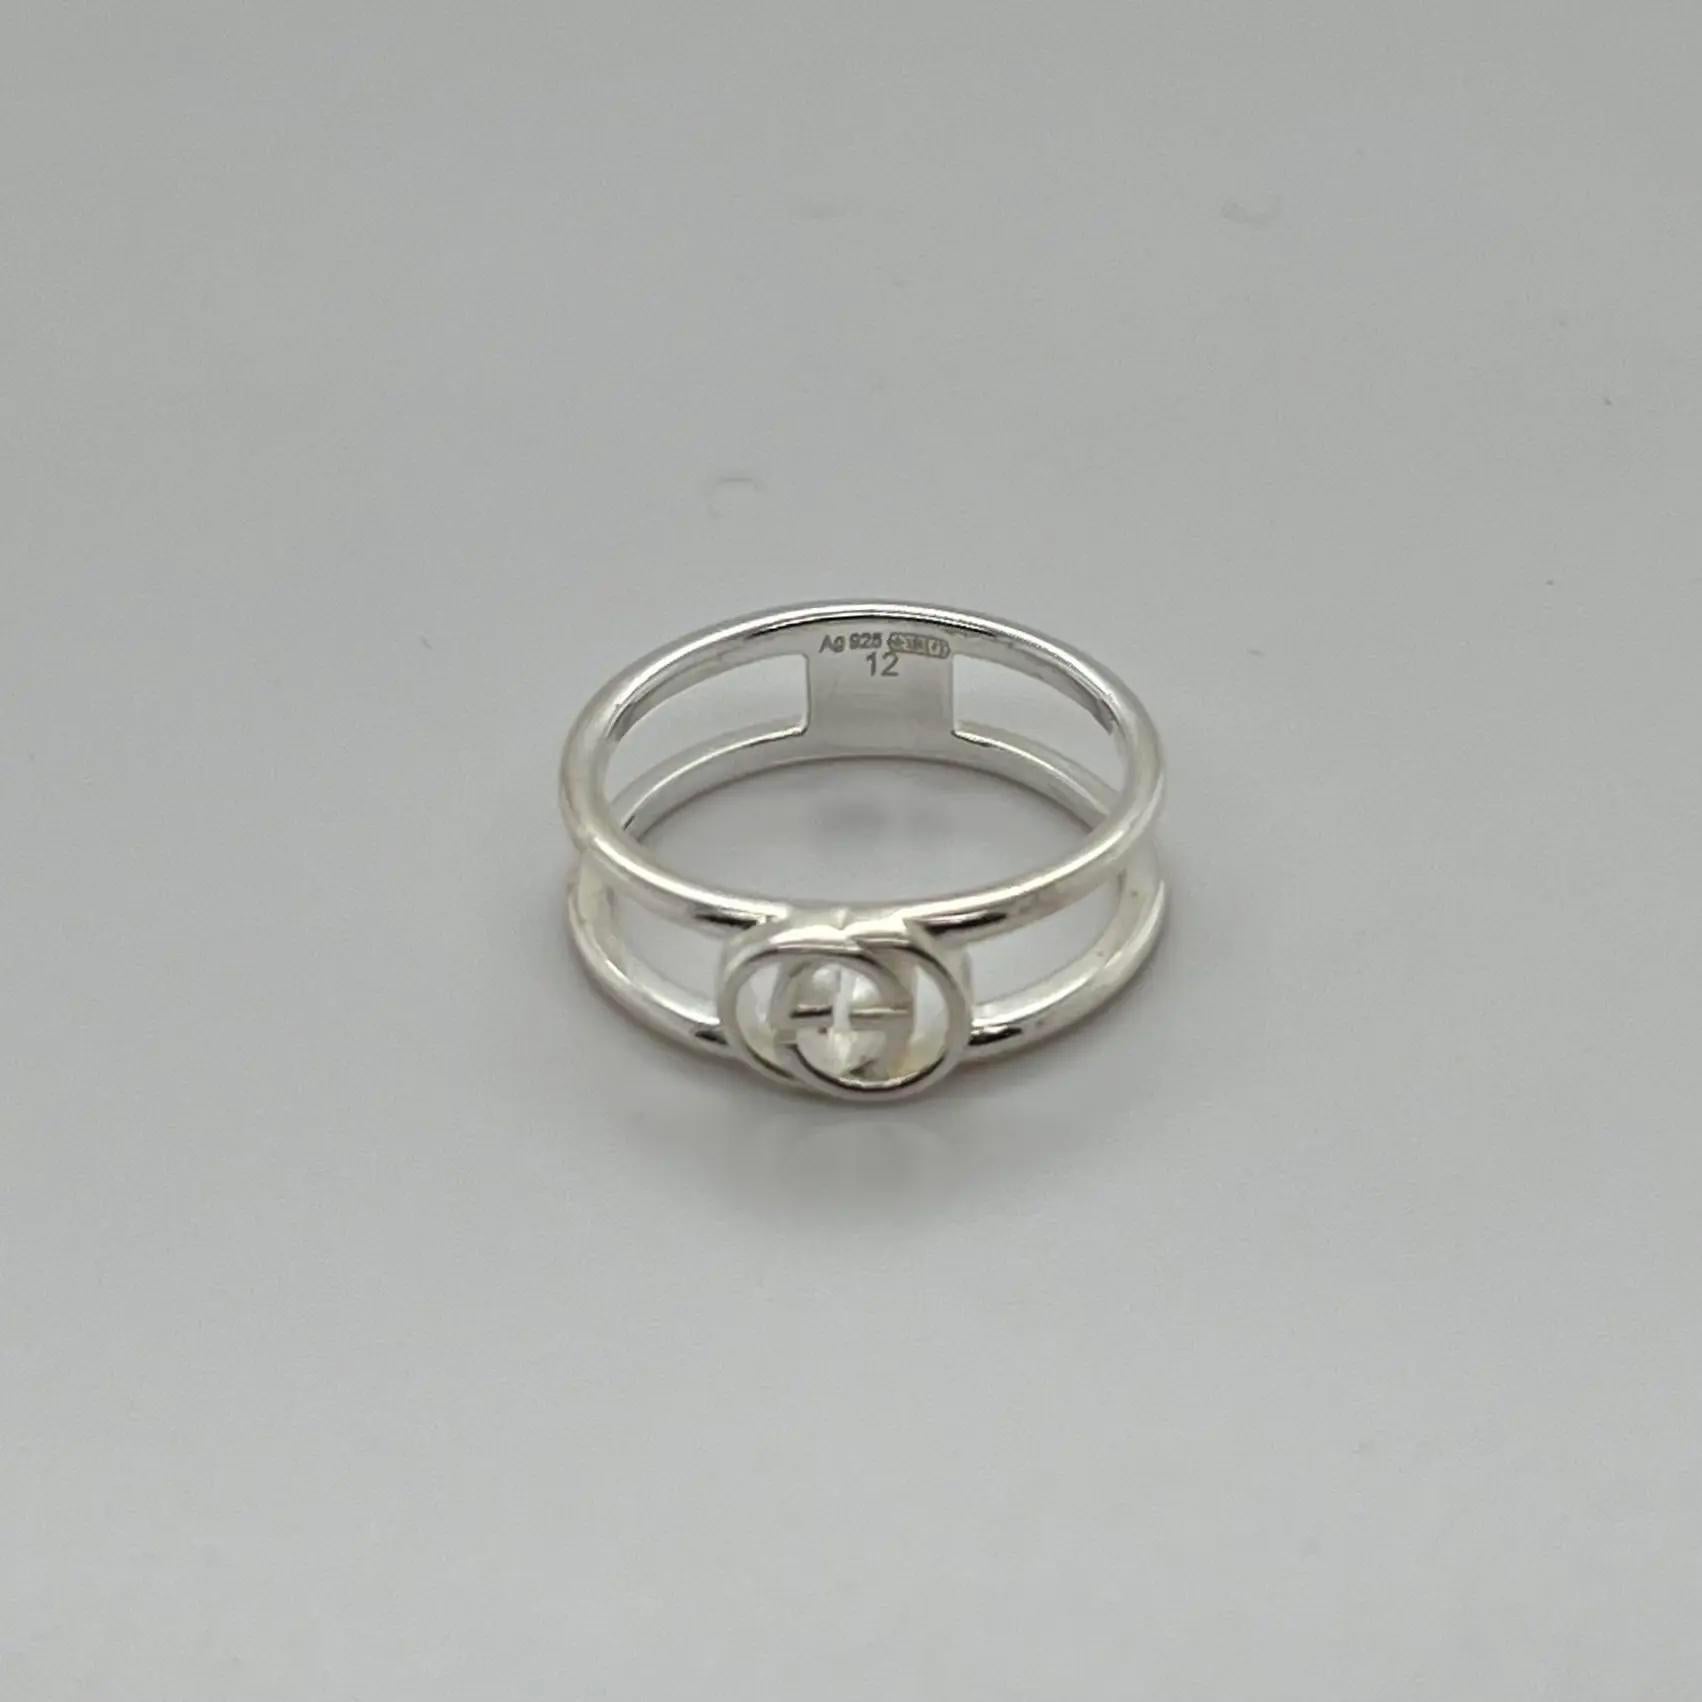 This GUCCI interlocking G thin band ring is designed in 925 sterling silver. Featuring two bands connected by Guccio Gucci's monogram in the center. Ring size: 12 US 6. Ring width: 5.9mm. Total weight: 2.65 grams. Made in Italy. Unworn condition.